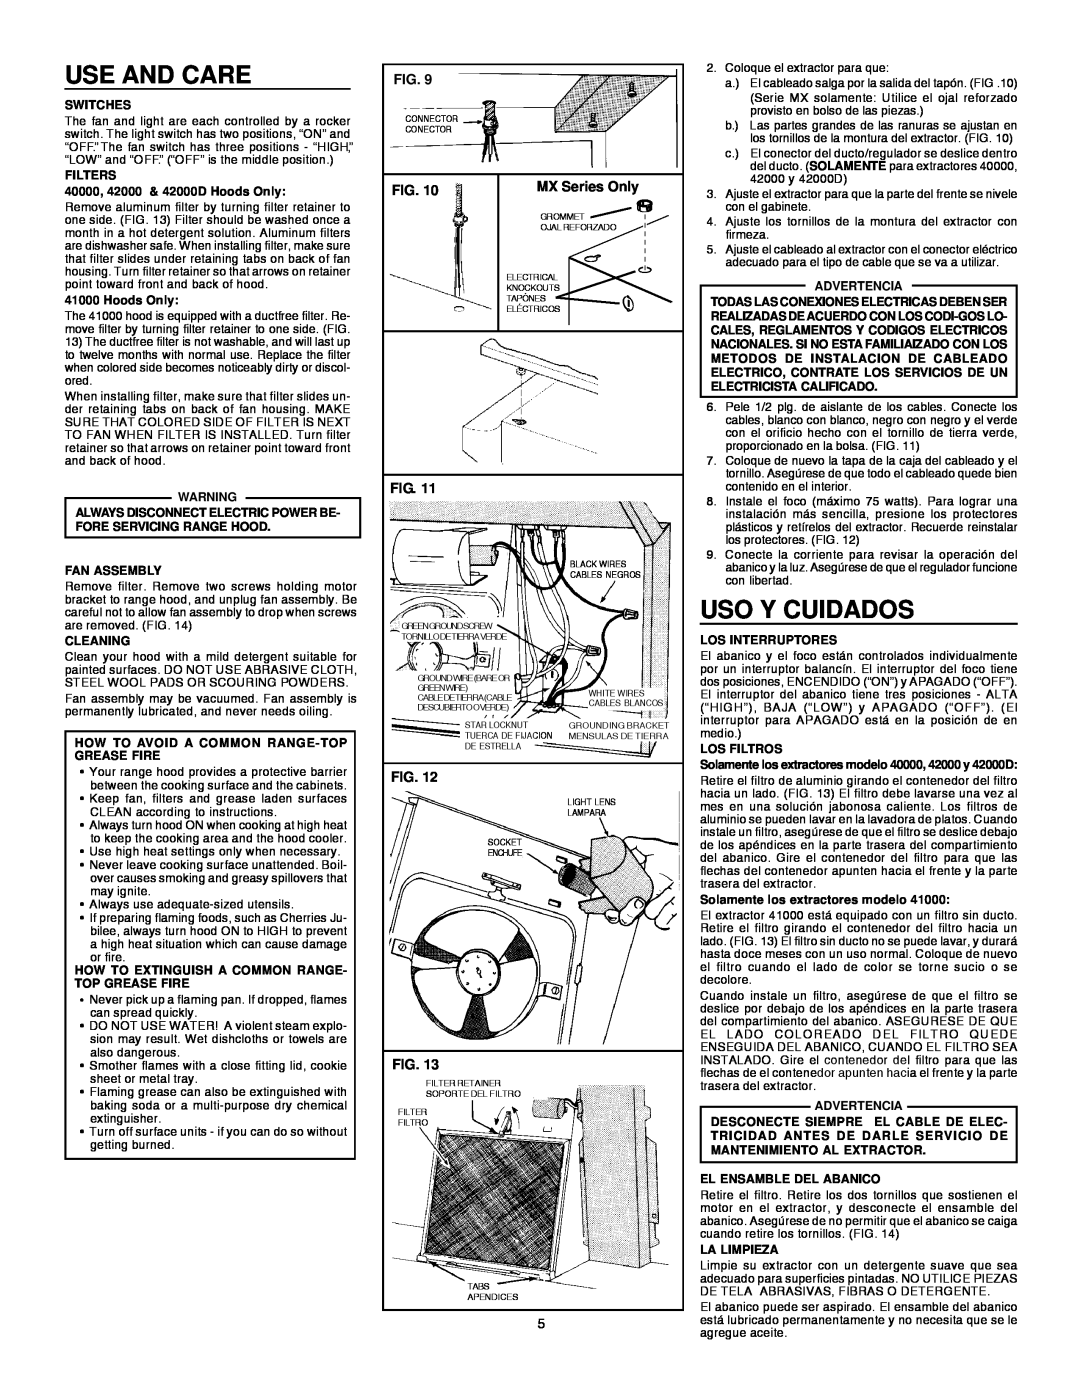 Broan 412404 installation instructions Use And Care, Uso Y Cuidados, MX Series Only 